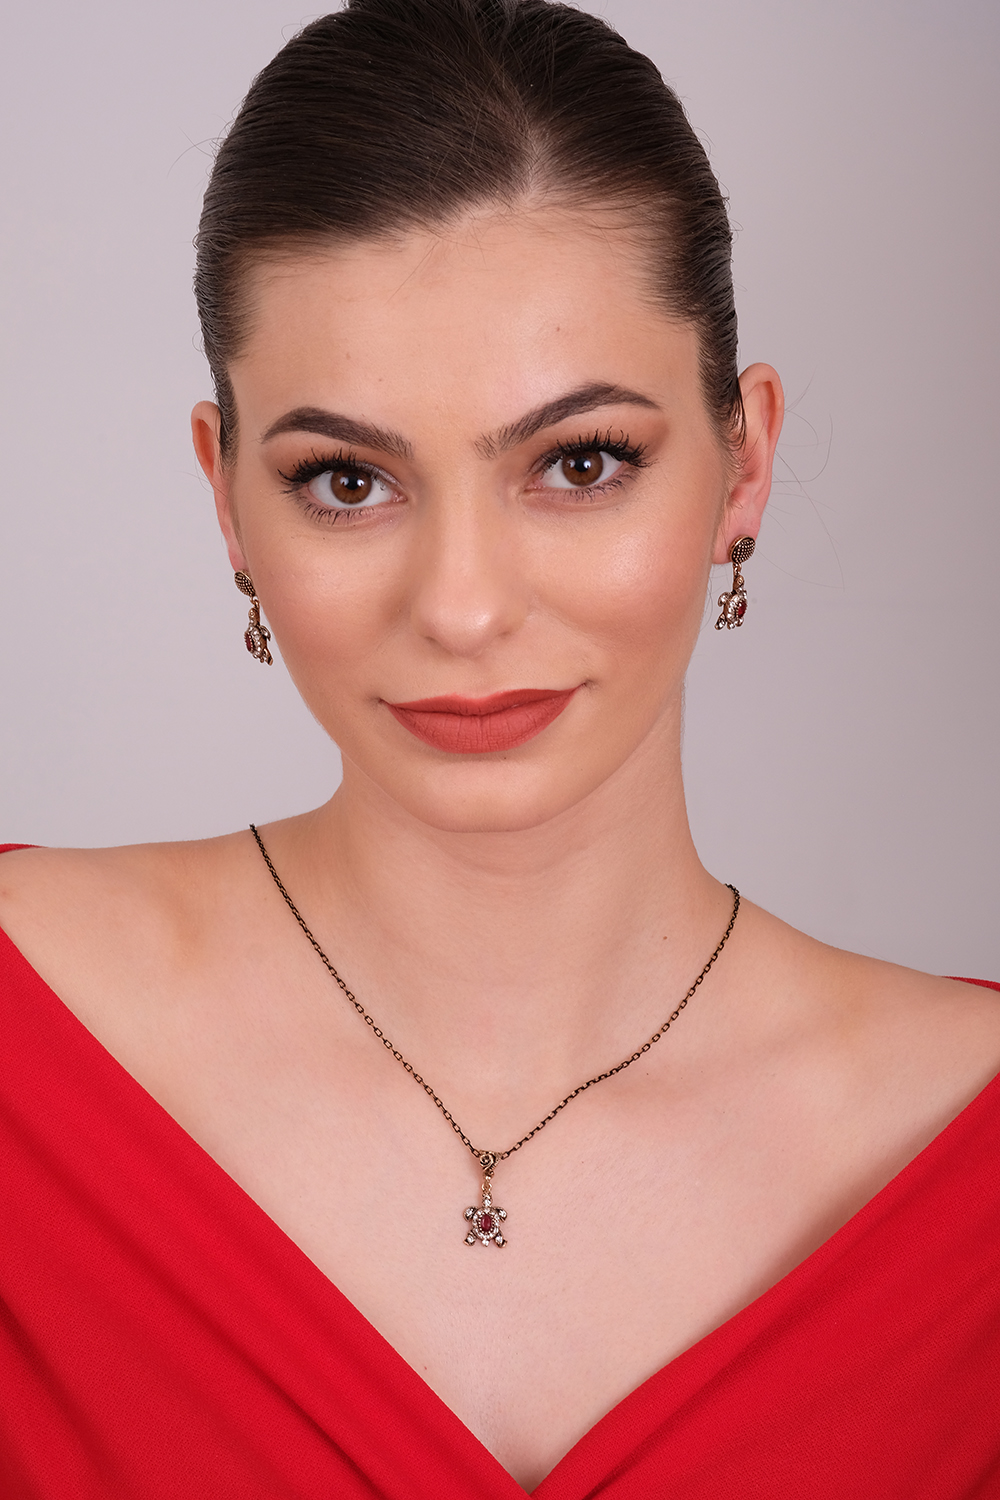 PAVLOS Necklace and Earrings Jewelry Set